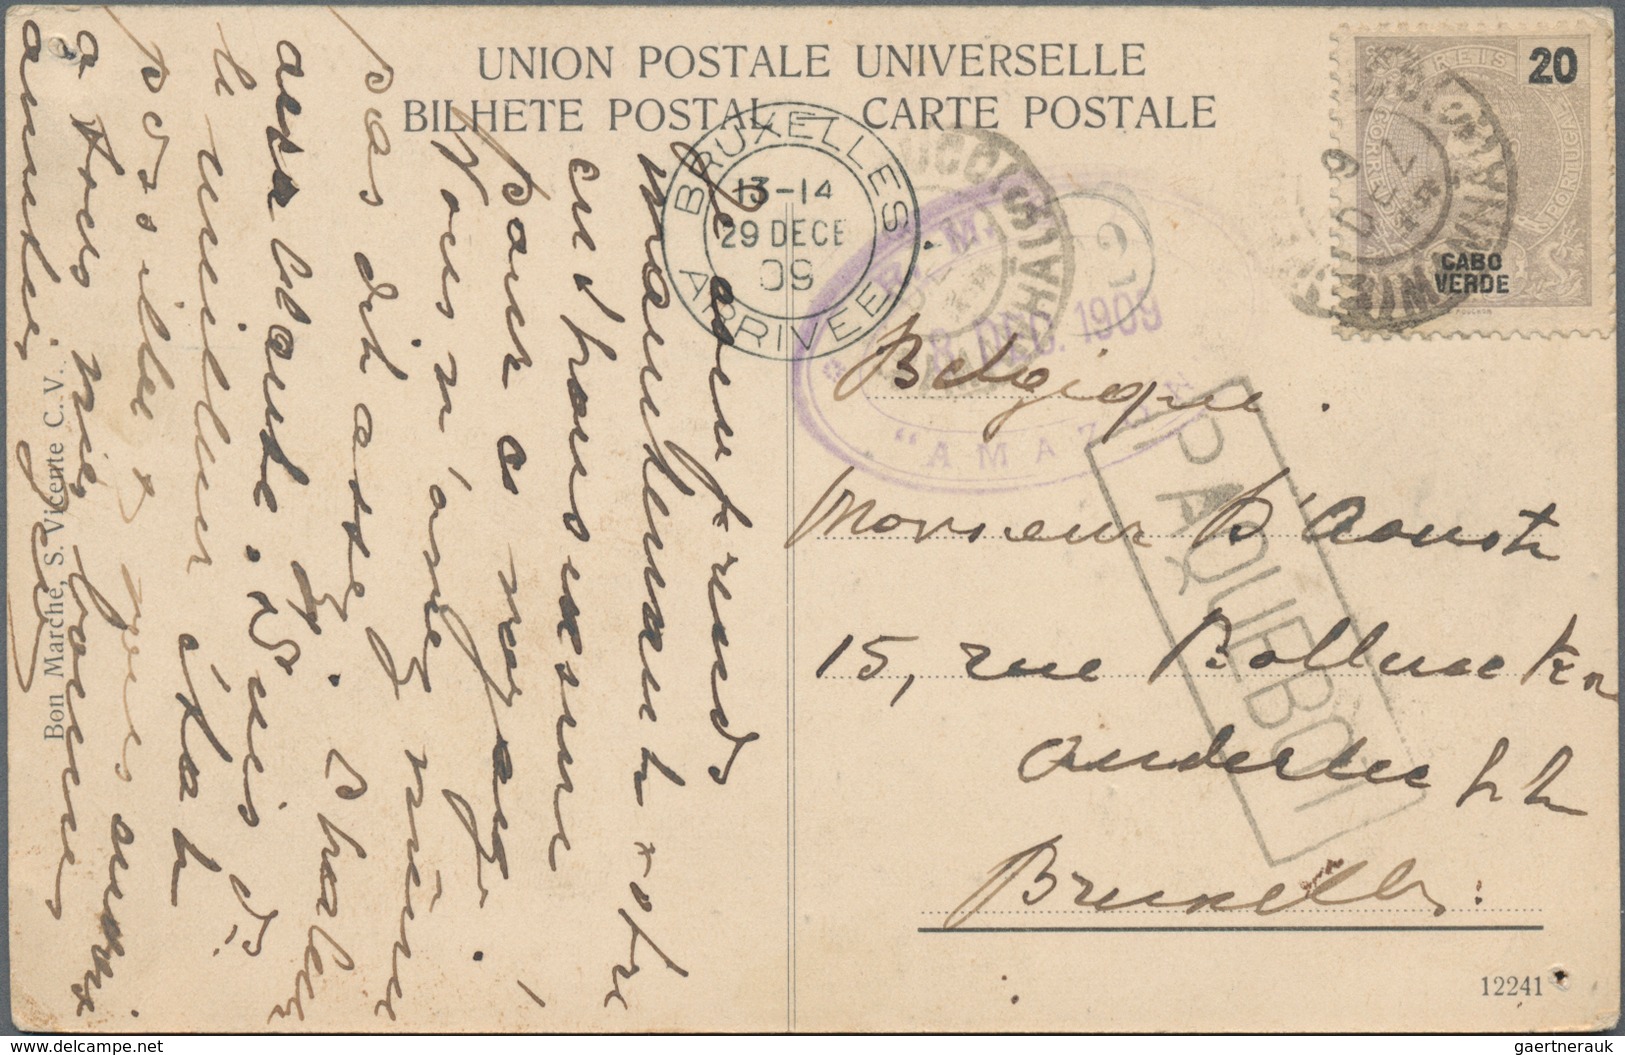 Alle Welt: 1880/1970 (ca.): Fine Lot Of About 200 Covers, Cards And Stationeries Comprising Interest - Colecciones (sin álbumes)